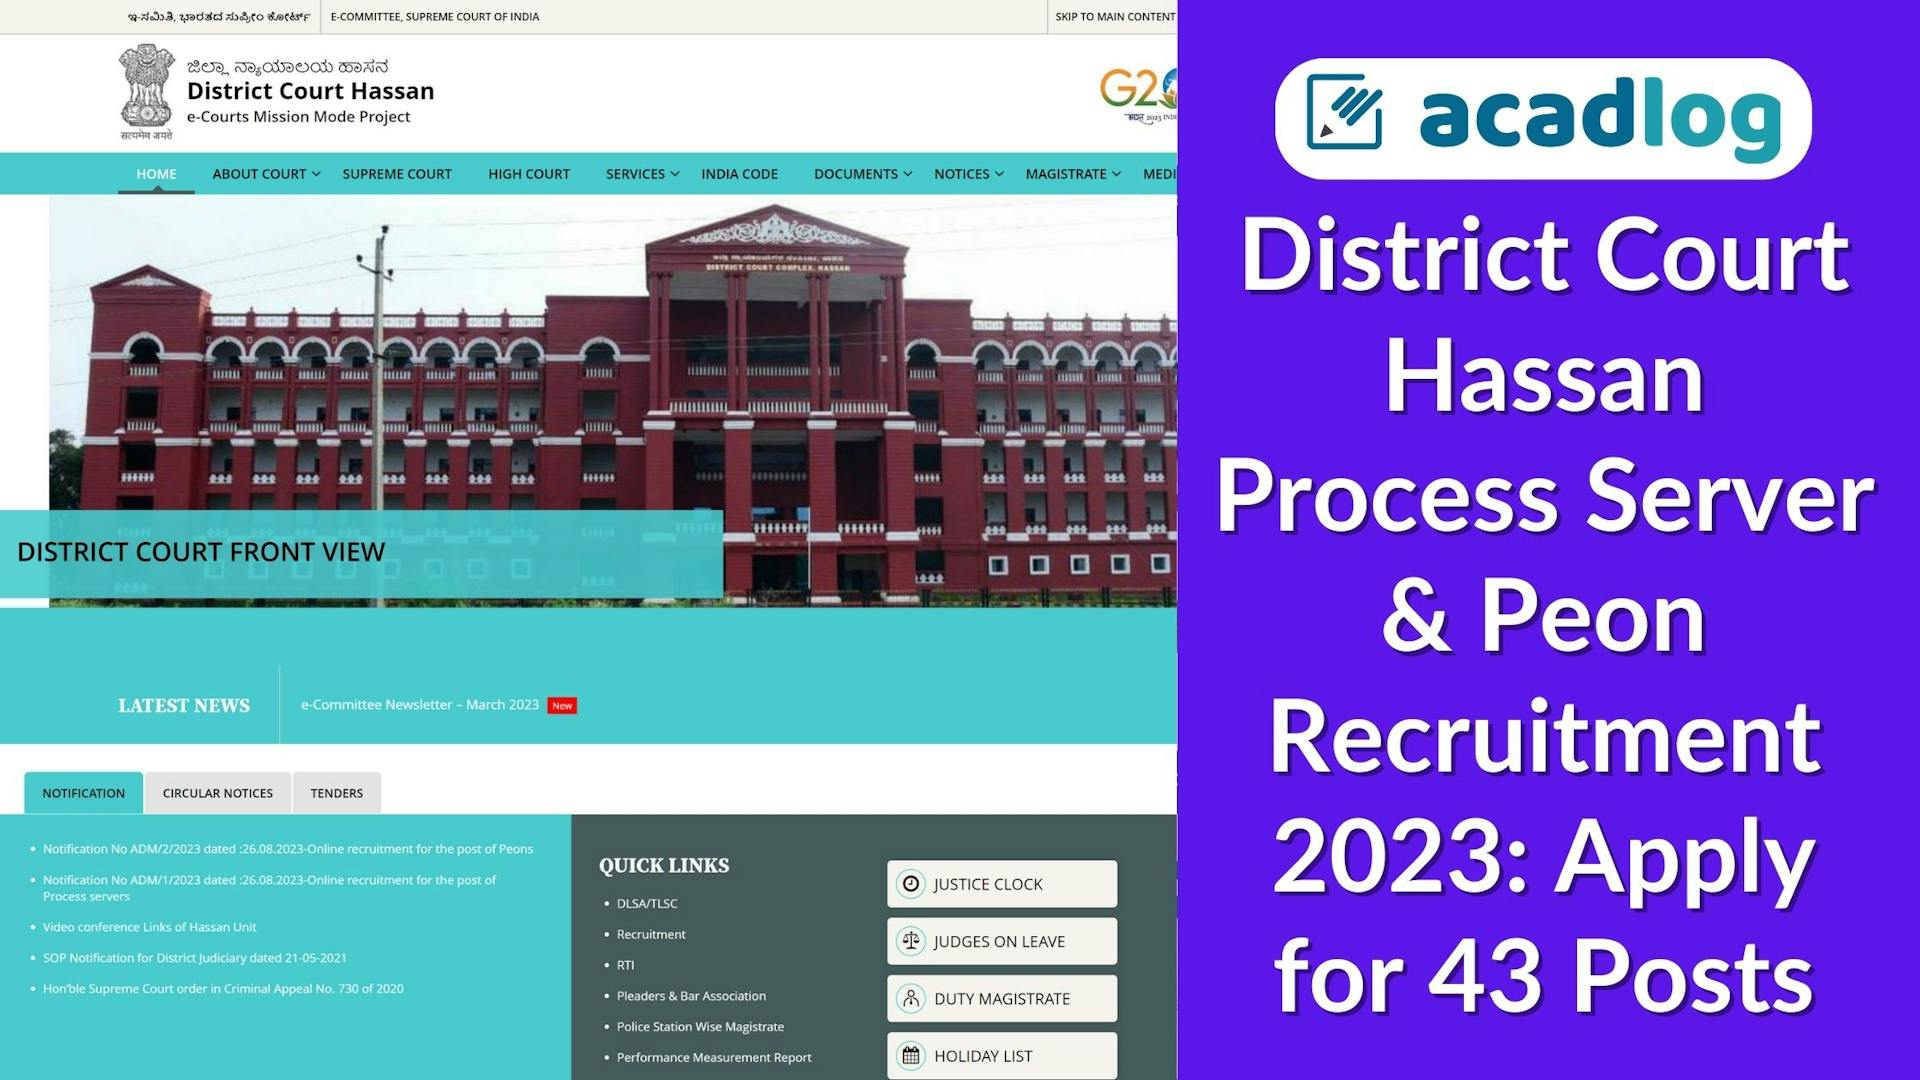 District Court Hassan Process Server & Peon Recruitment 2023: Apply for 43 Posts